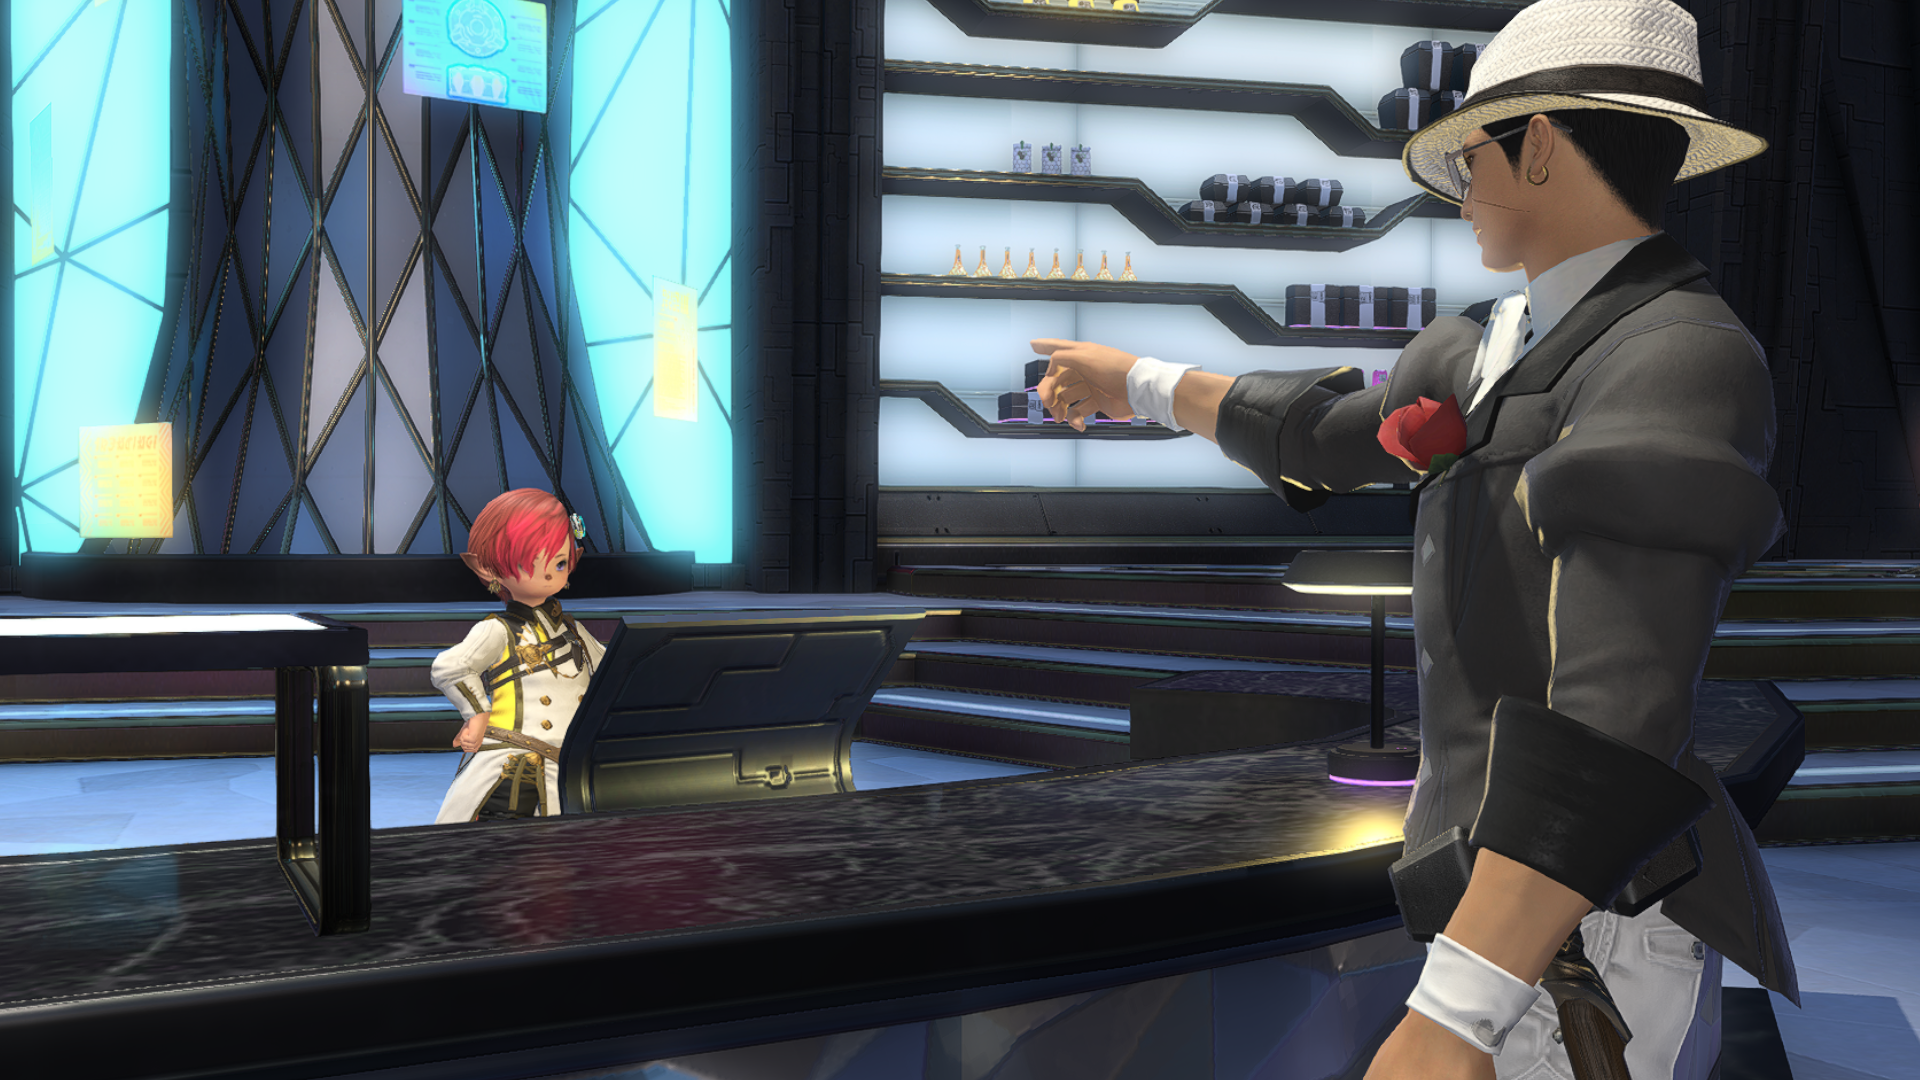 A crafter accosts a scrip vendor behind a counter in Final Fantasy 14, the two are surrounded by hi-tech scenery.